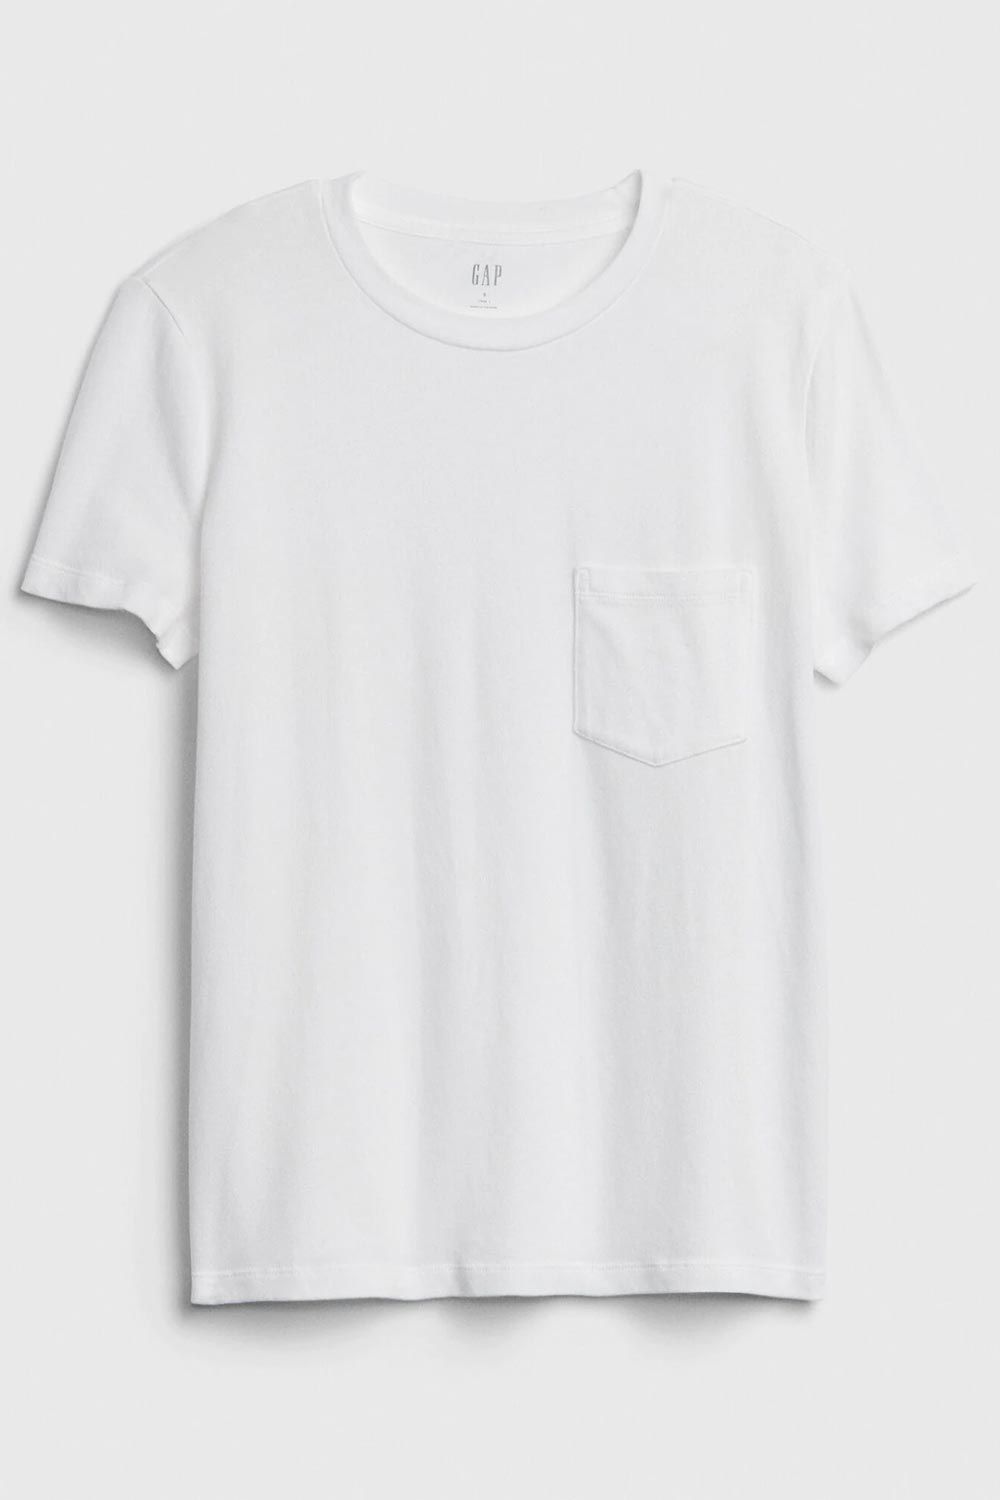 White t-shirts so perfect you'll wear them non-stop | Marie Claire UK